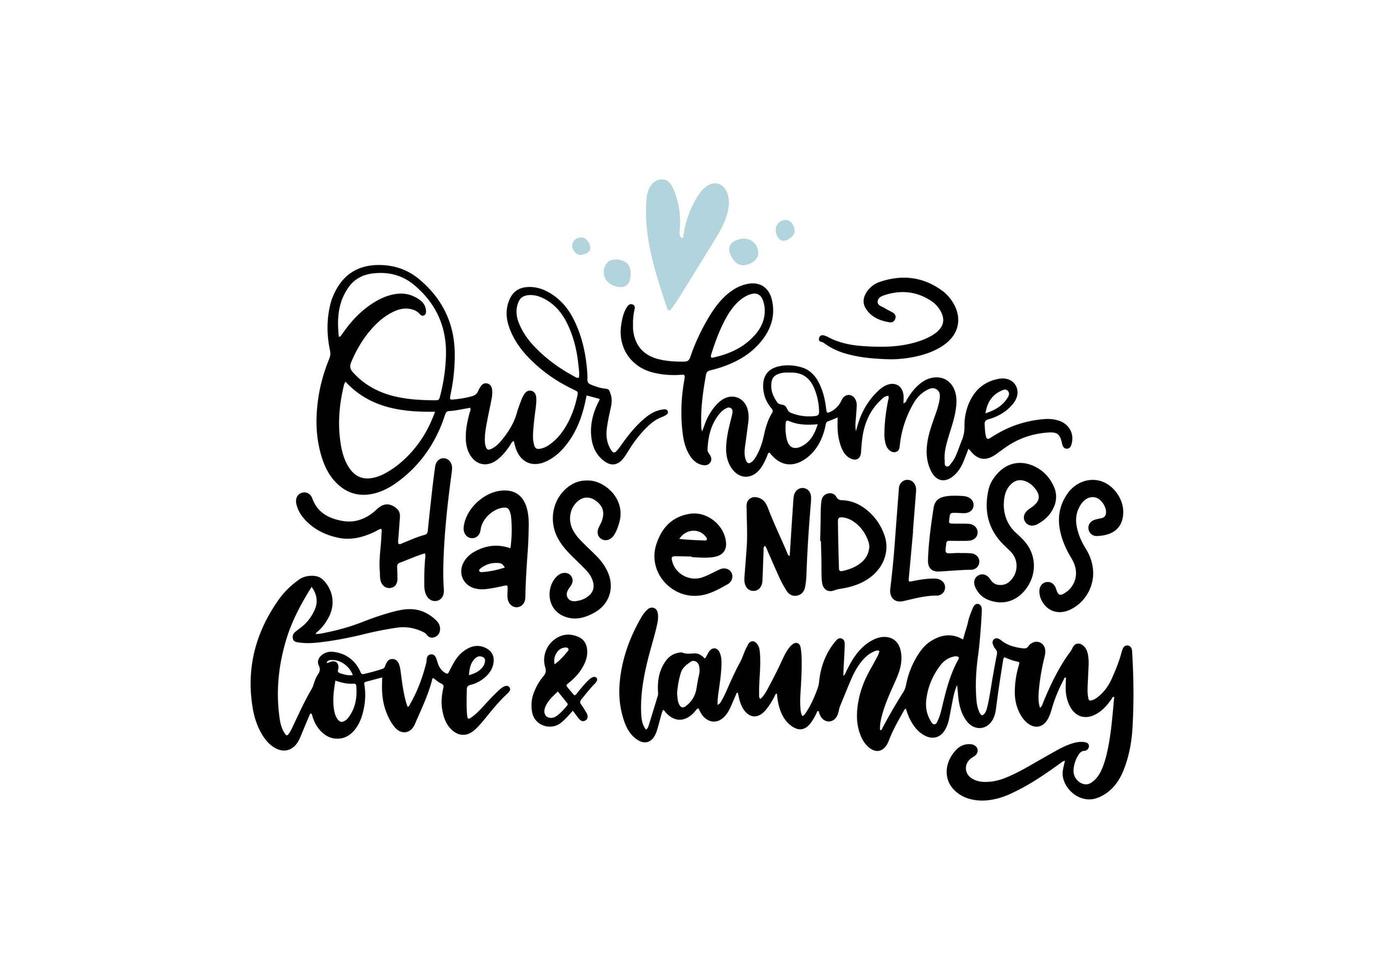 Our home has endless love and laundry - lettering quote. Trendy calligrapy text for overlay. Concept for Spring cleaning, clean clothing, domestic life, routine, housekeeper vector